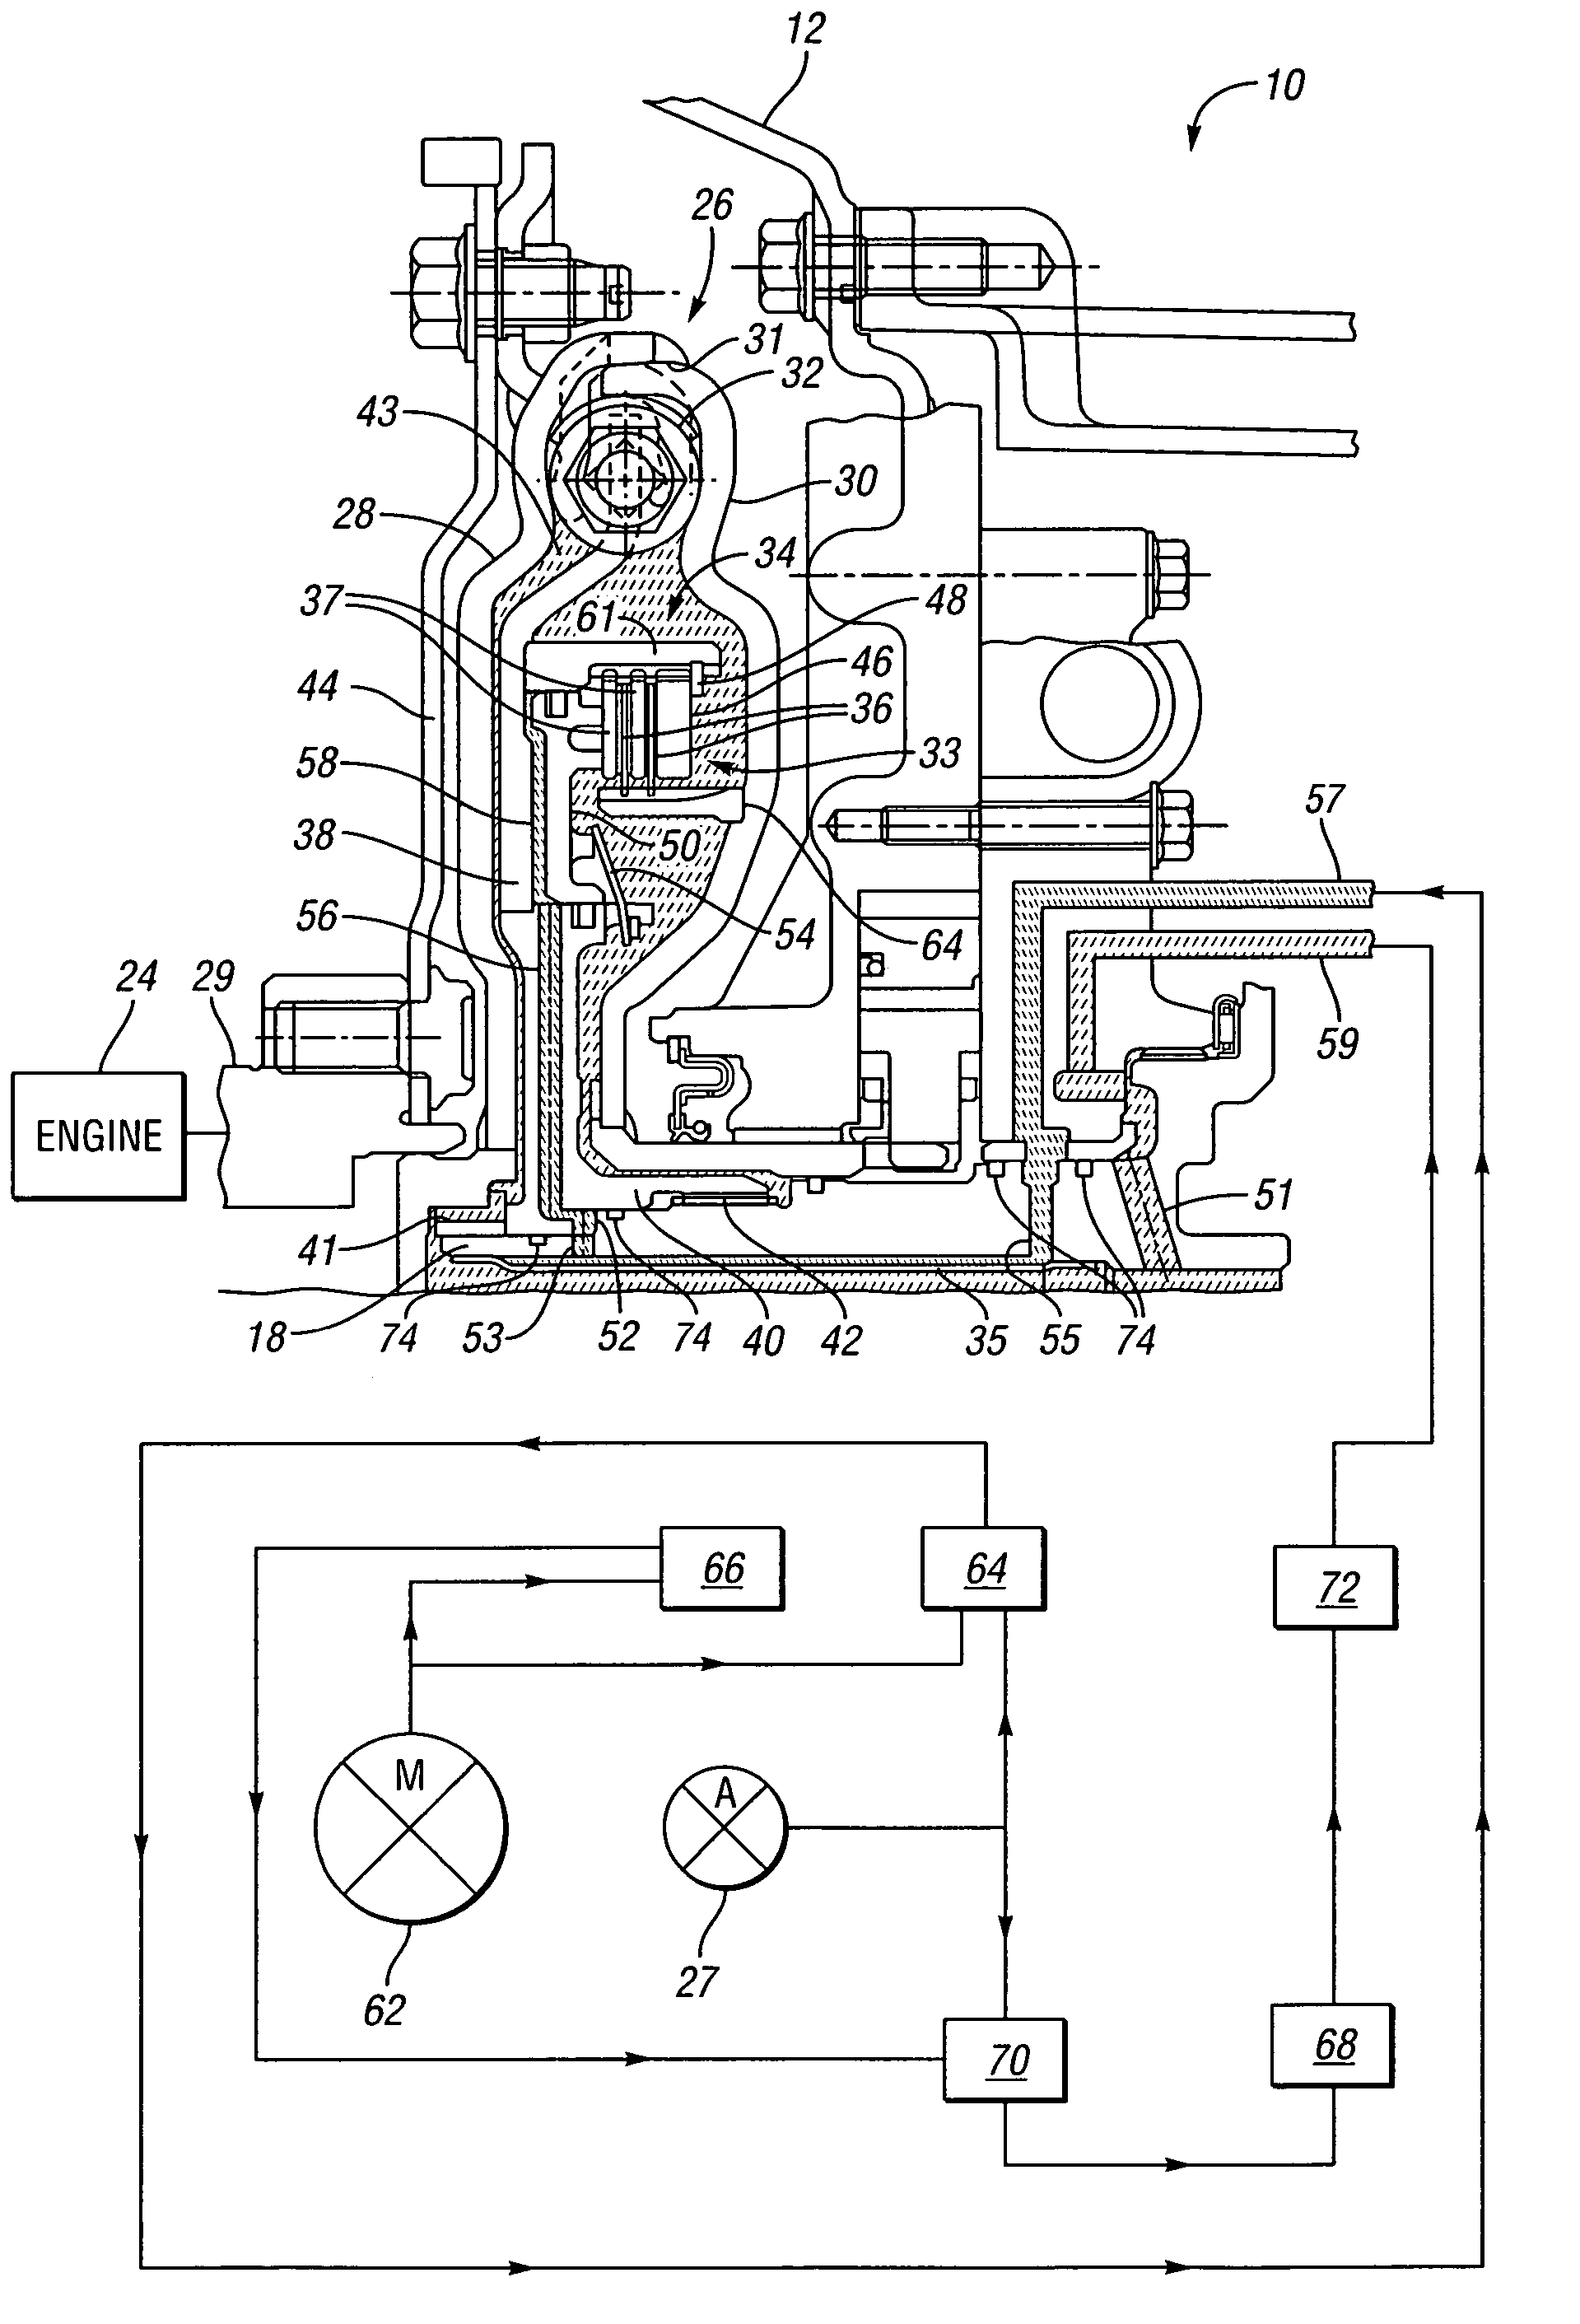 Hydraulic circuit for torsional damper assembly of an electrically variable transmission